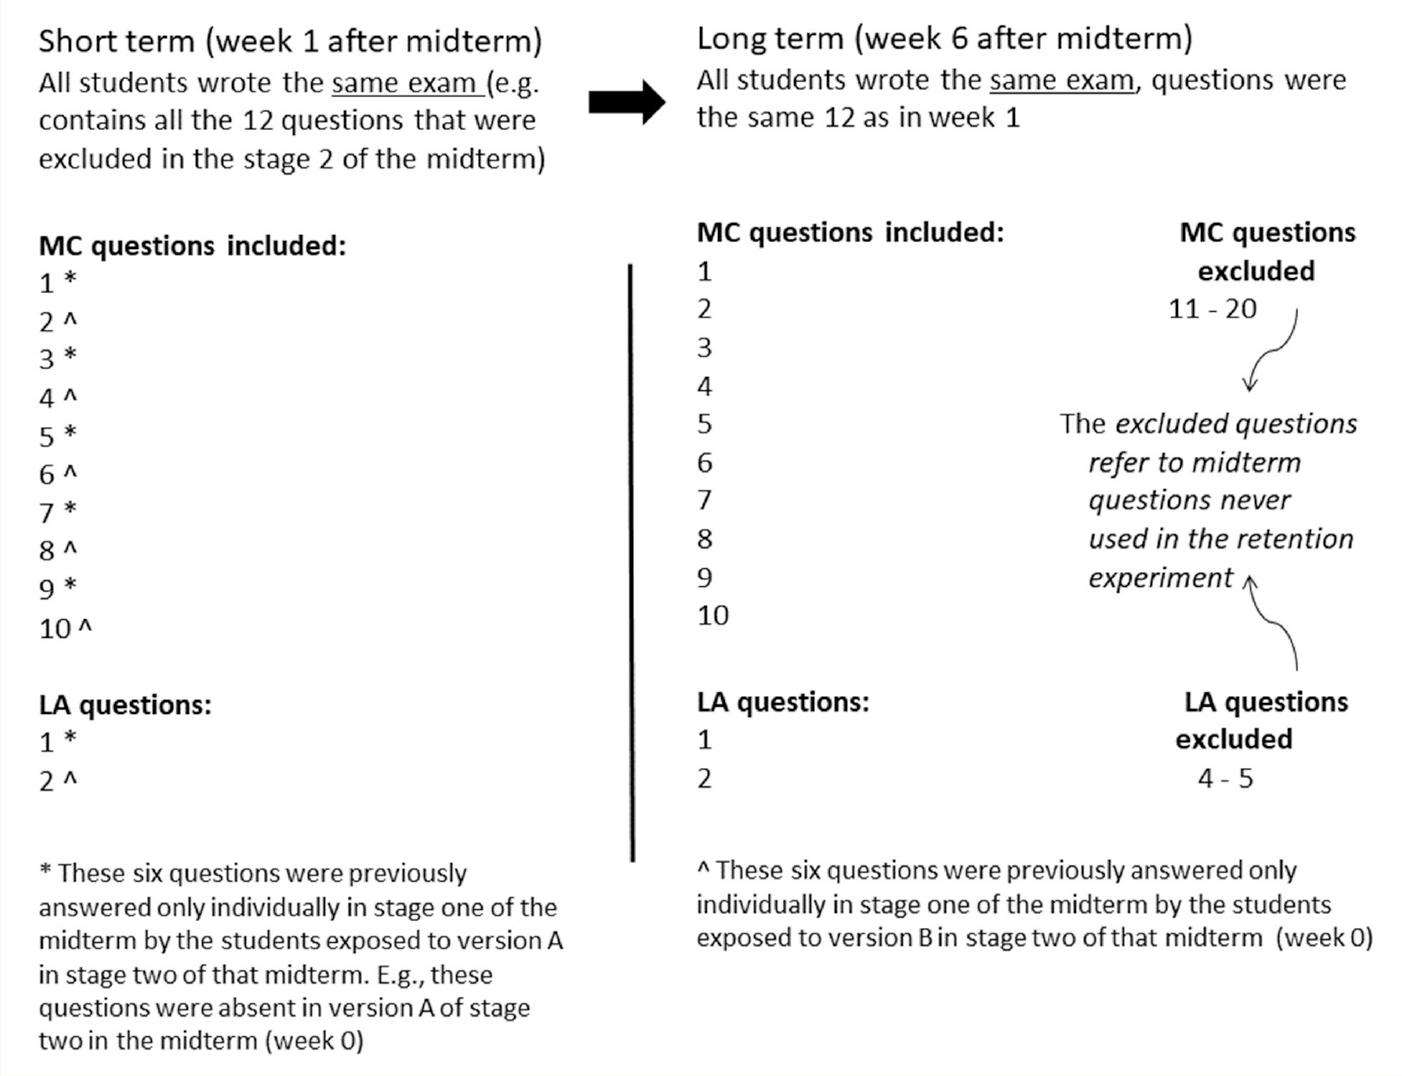 Questions used in the retention exams across time (MC = multiple choice, LA = long answer).